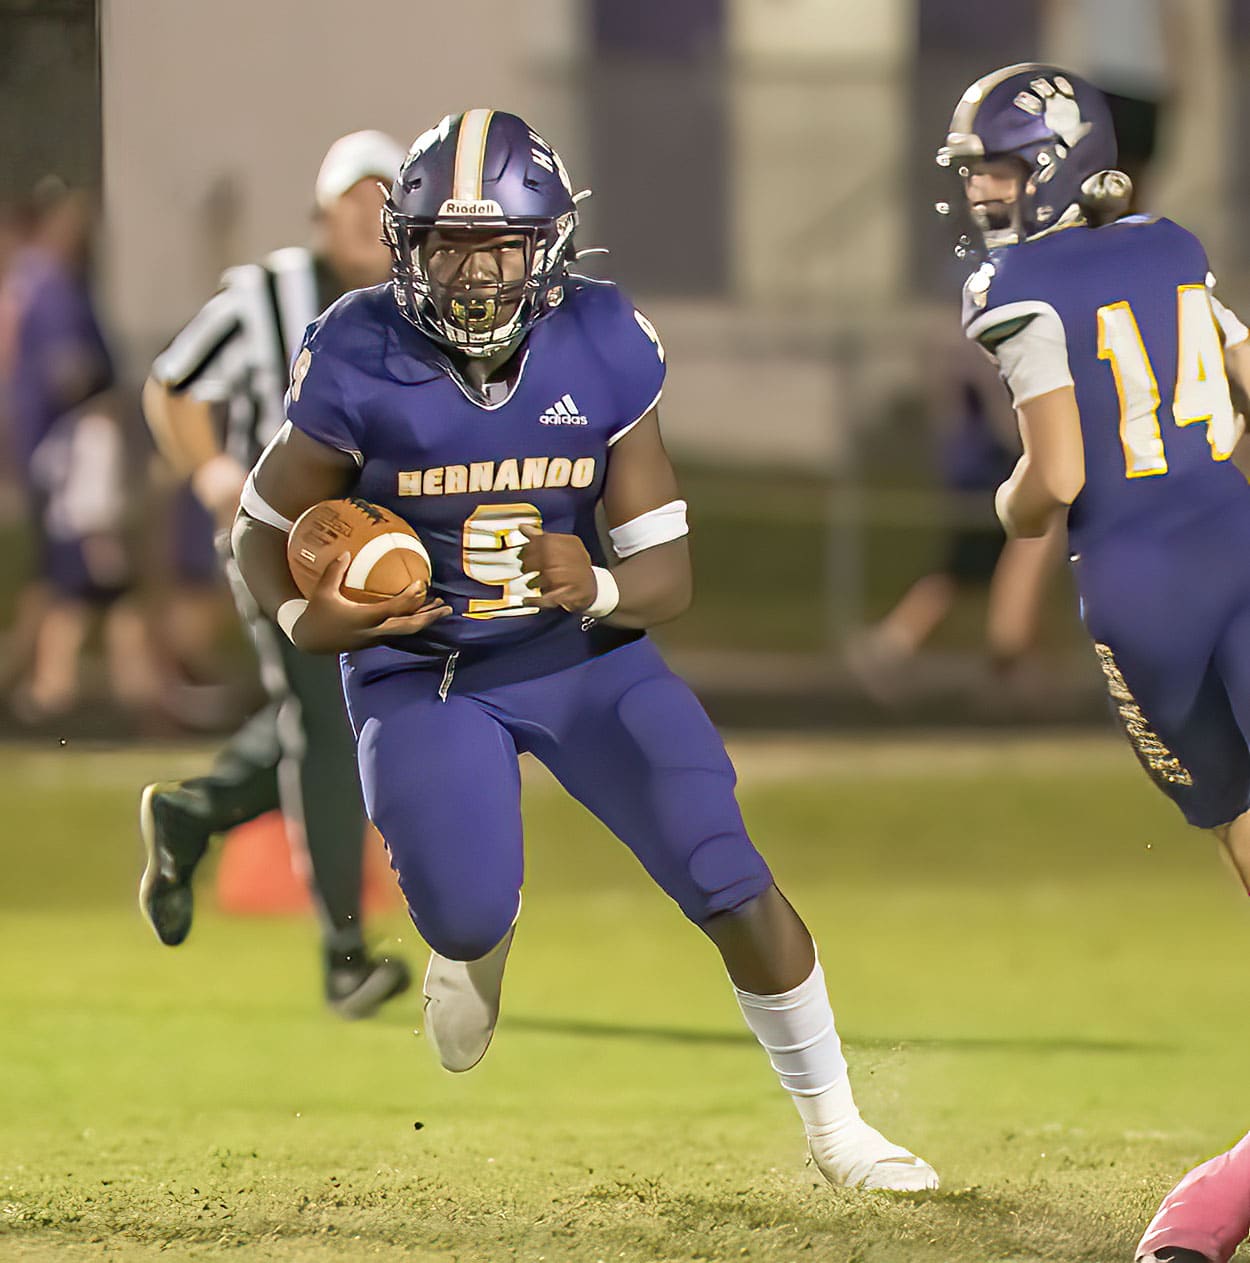 Hernando High running back John Capel III runs for a gain after taking a hand off from ,14, Michael Saltsman during the Homecoming game against Crystal River. Photo by JOE DiCRISTOFALO